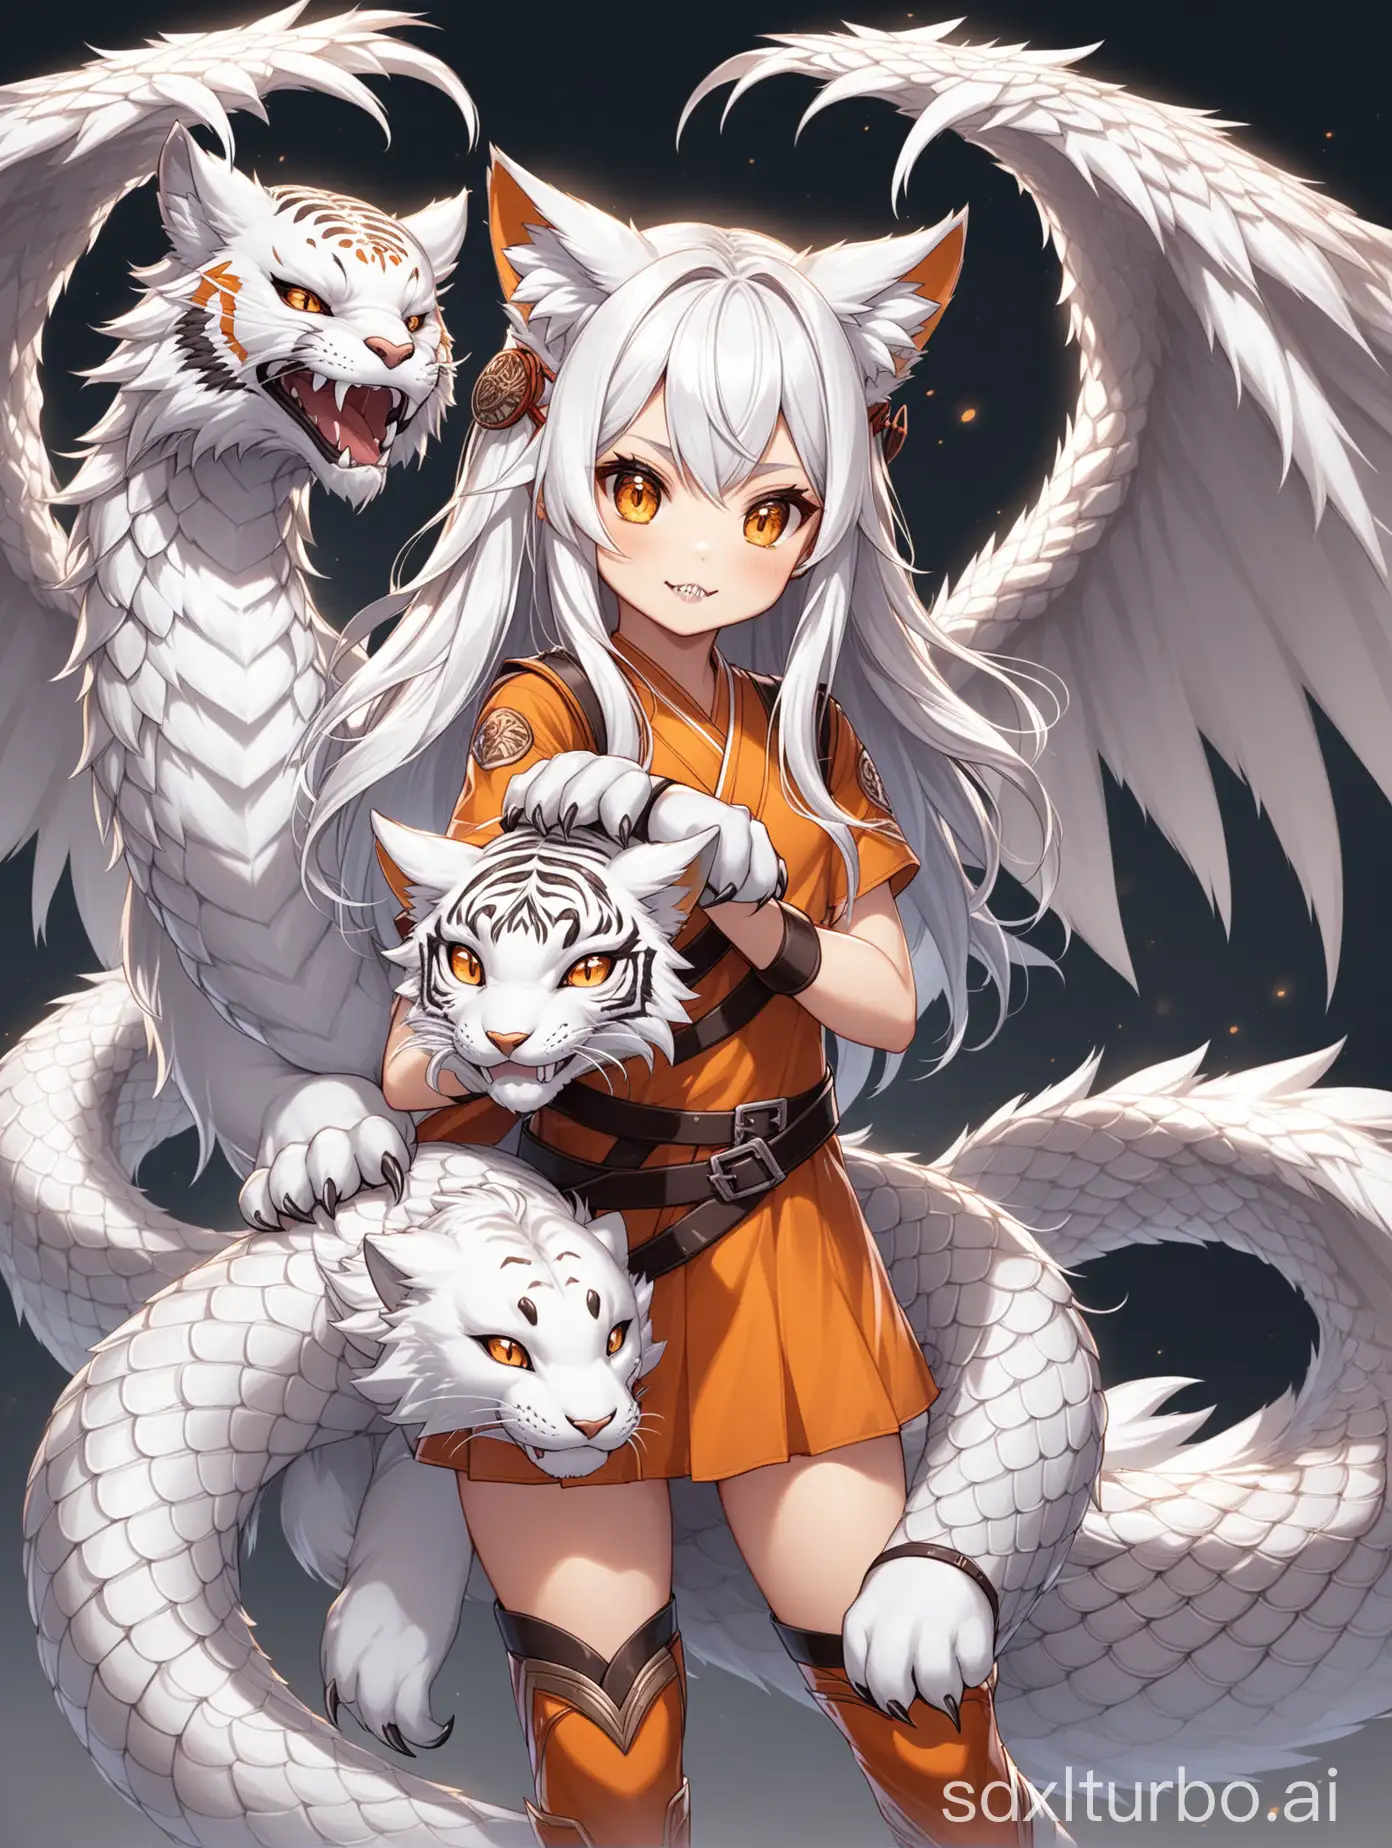 A 9-tailed fox with white tiger ears, dragon scales (a few on the arms), dragon claws, sculpted eagle wings, snake teeth, and a cute girl of 9 years old